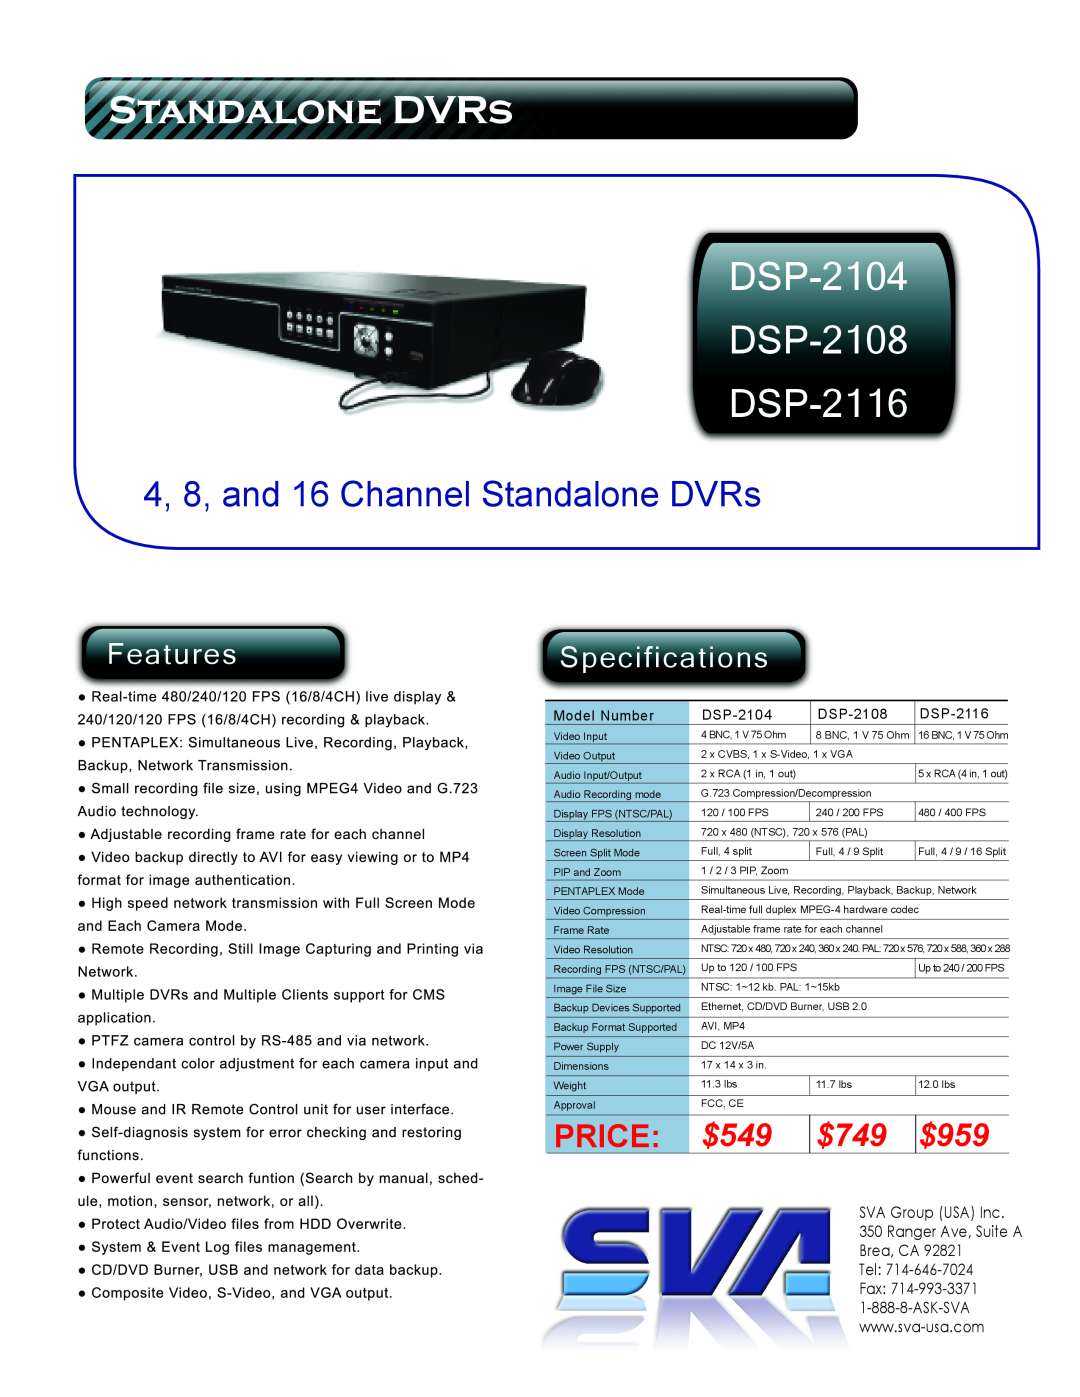 SVA manual DSP-2104 DSP-2108 DSP-2116, Features, Specifications, 4, 8, and 16 Channel Standalone DVRs, Price, $549 